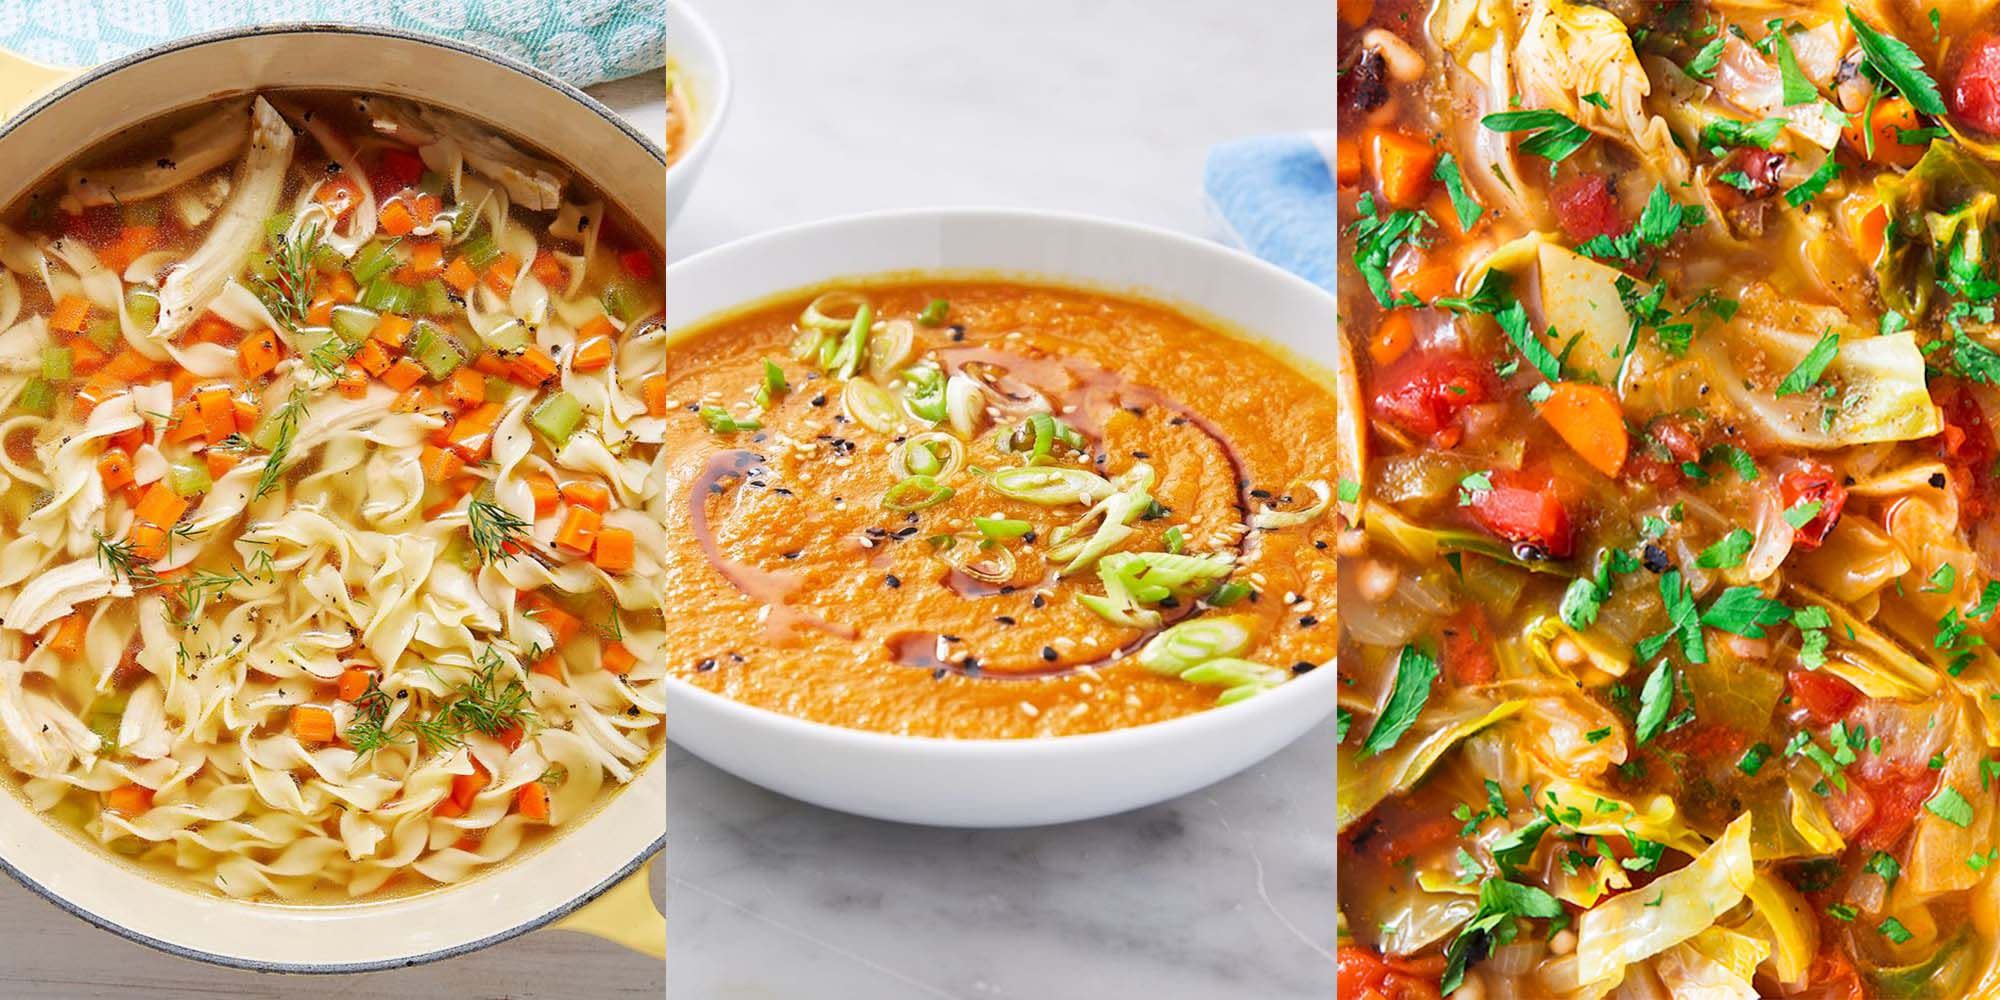 These Low Fat Soup Recipes Are 100% Worth Making (Trust Us)